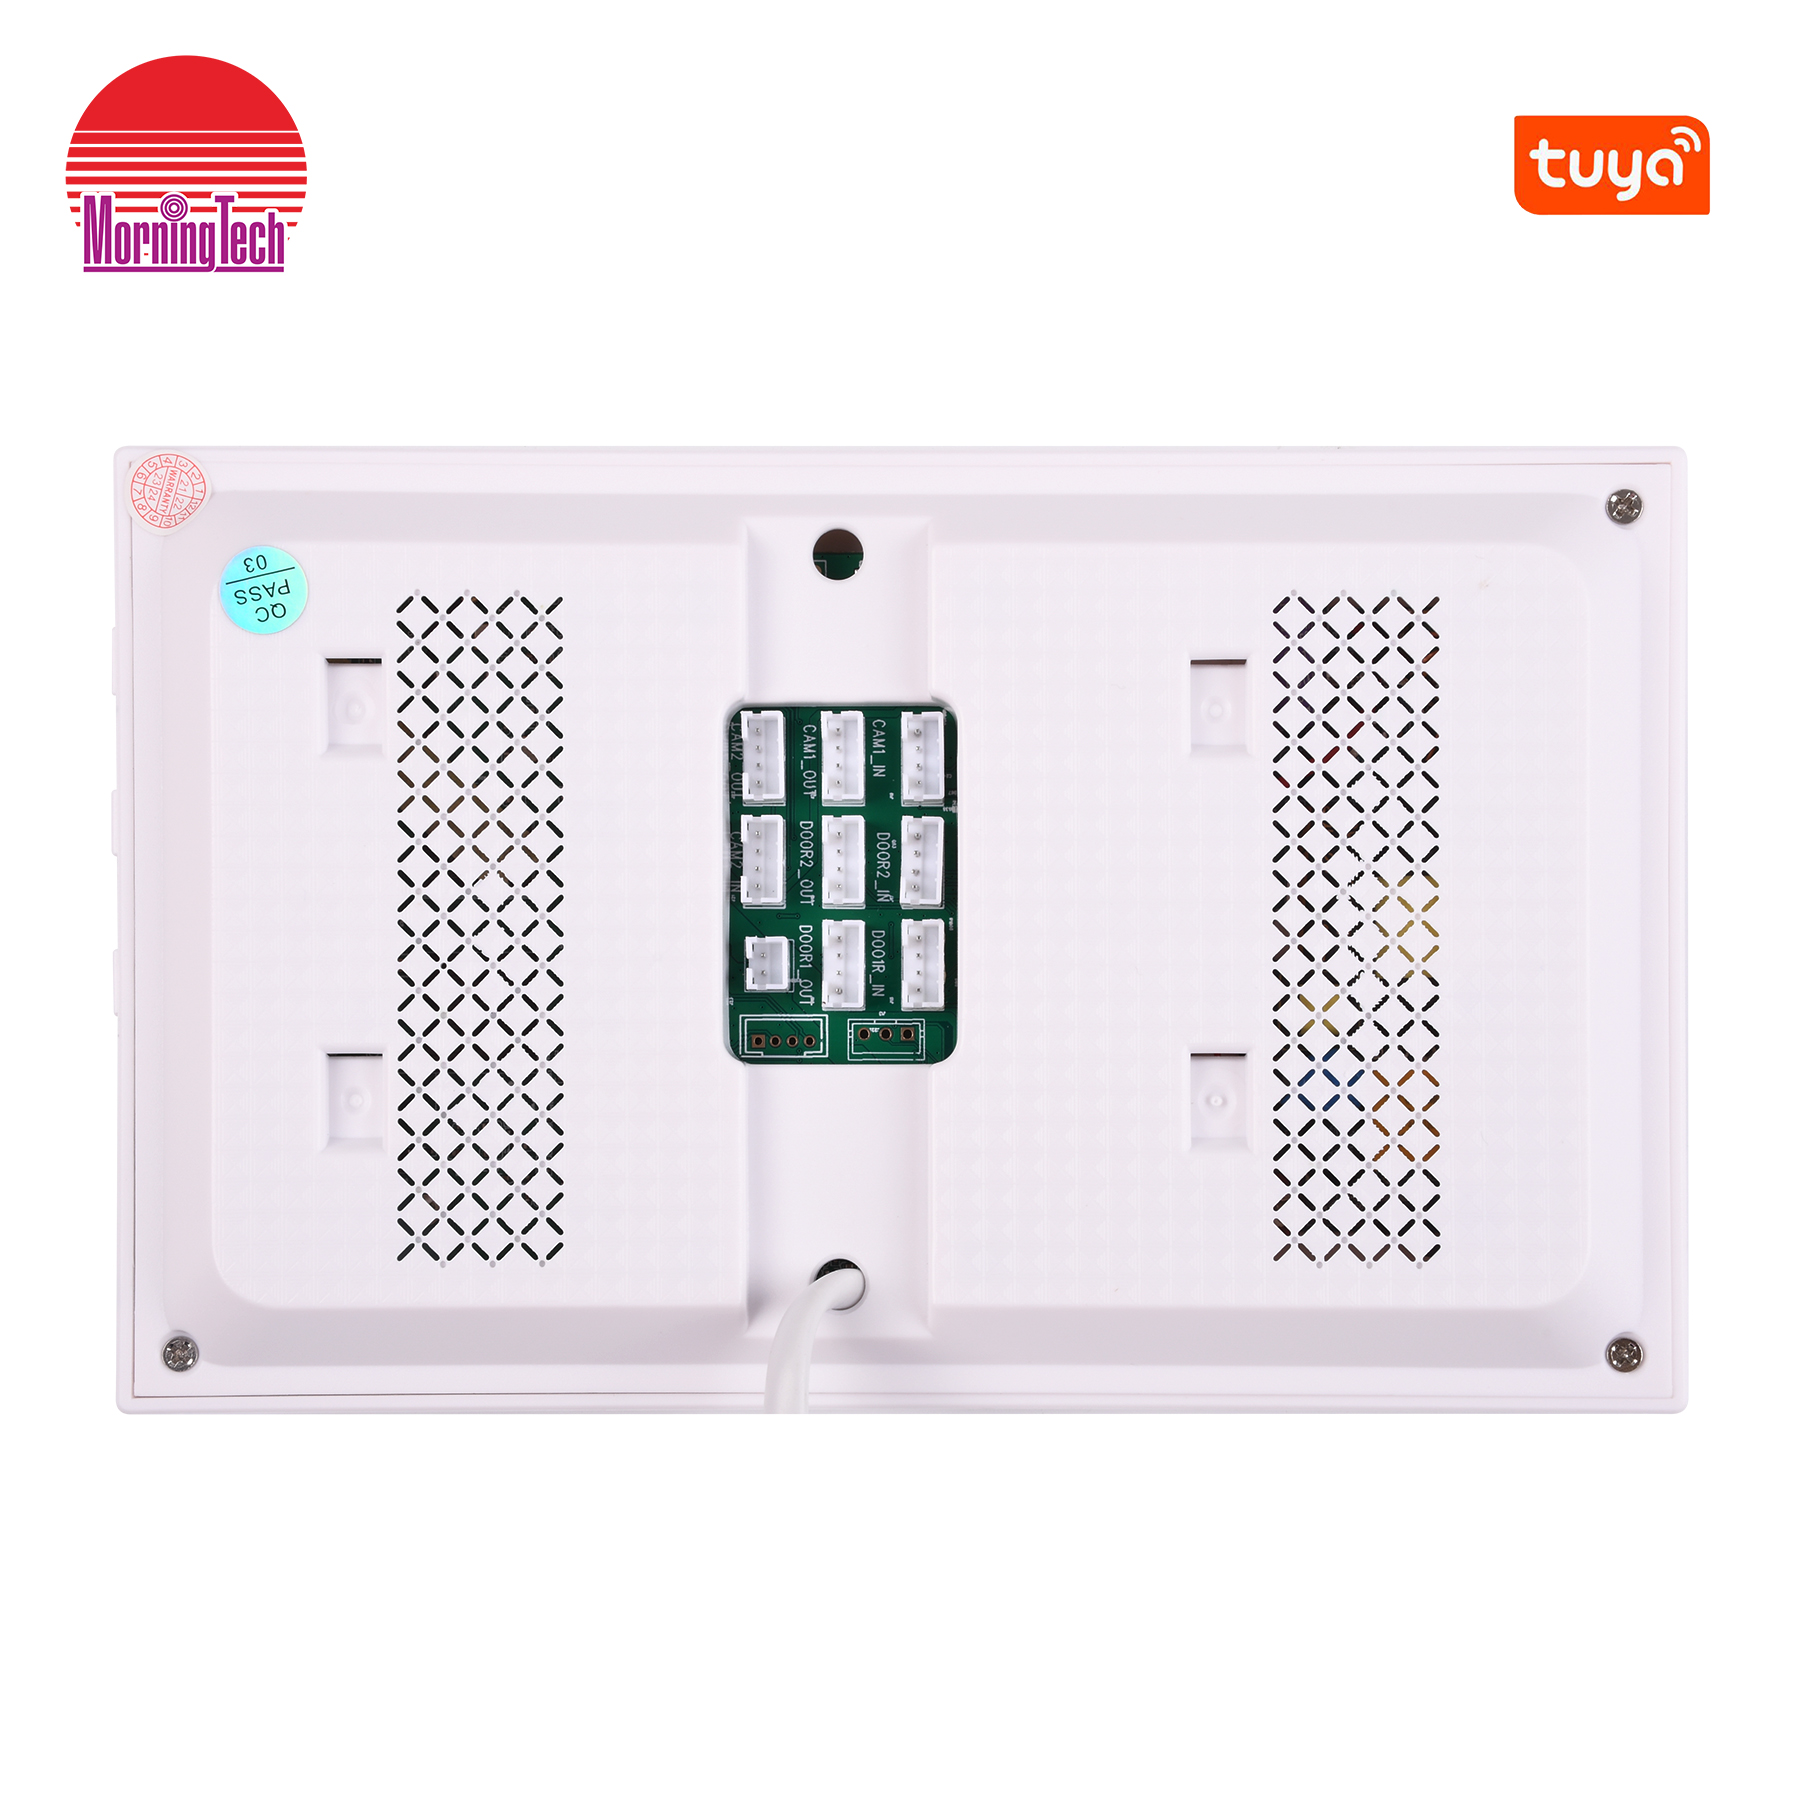 95230HP wifi Video door bell tuya devices for connecting old items achieve mobile phone remote control function